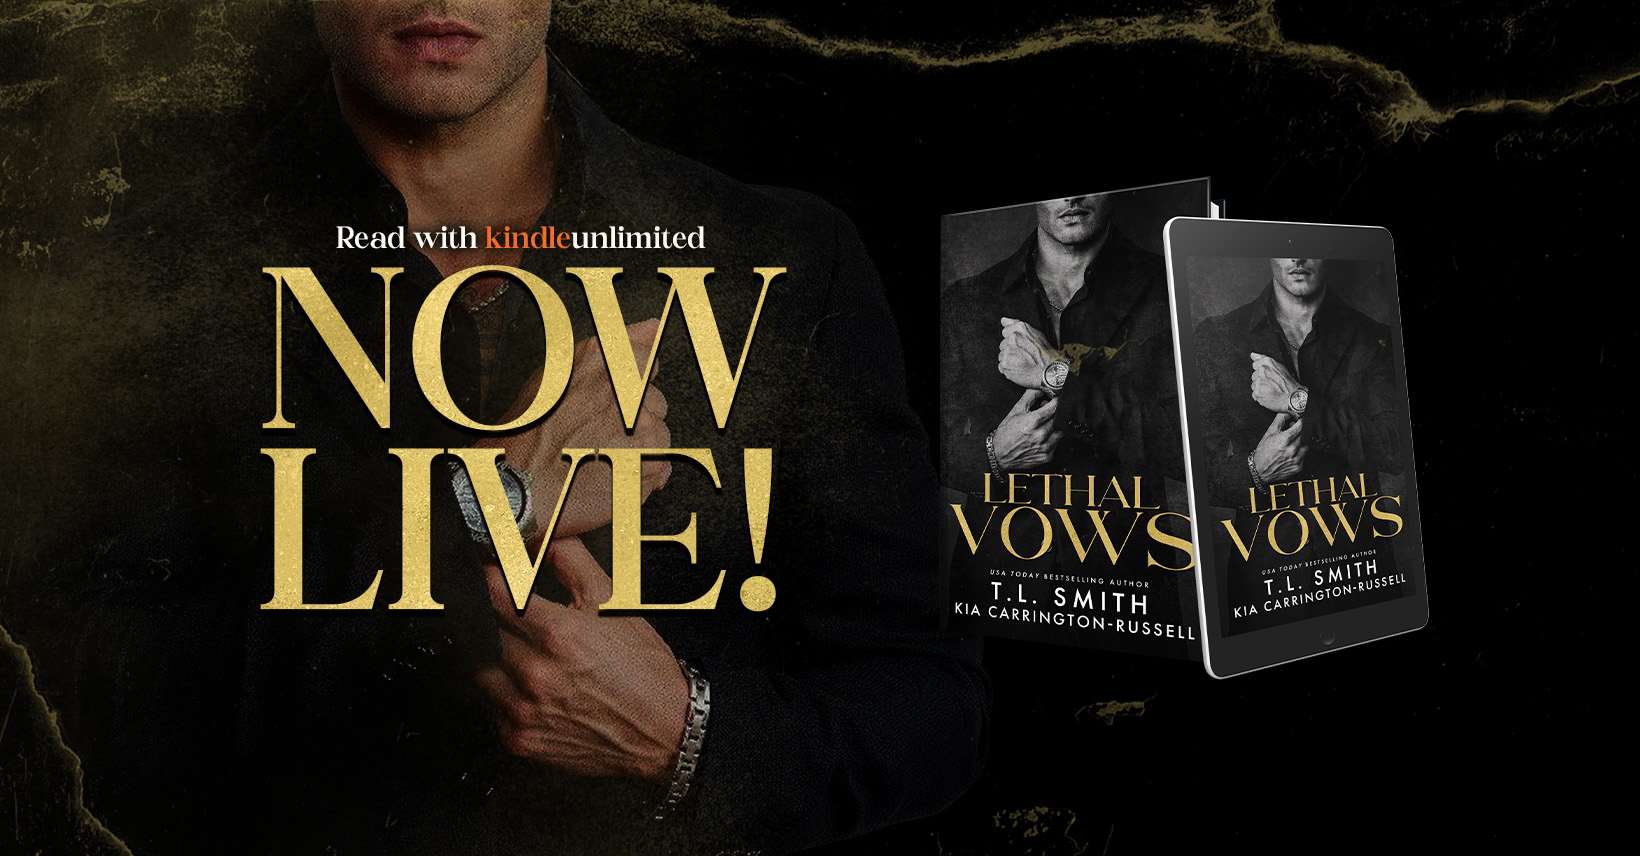 Lyla Sky on Instagram: Book Review! Lethal Vows by T.L. Smith and Kia  Carrington- Russell is a mafia romance. Releasing 12/27 and in KU 12/29!  #mafiaromancebooks #arrangedmarriage #oppositesattract #bookreview  #upcomingbook #spicybooks